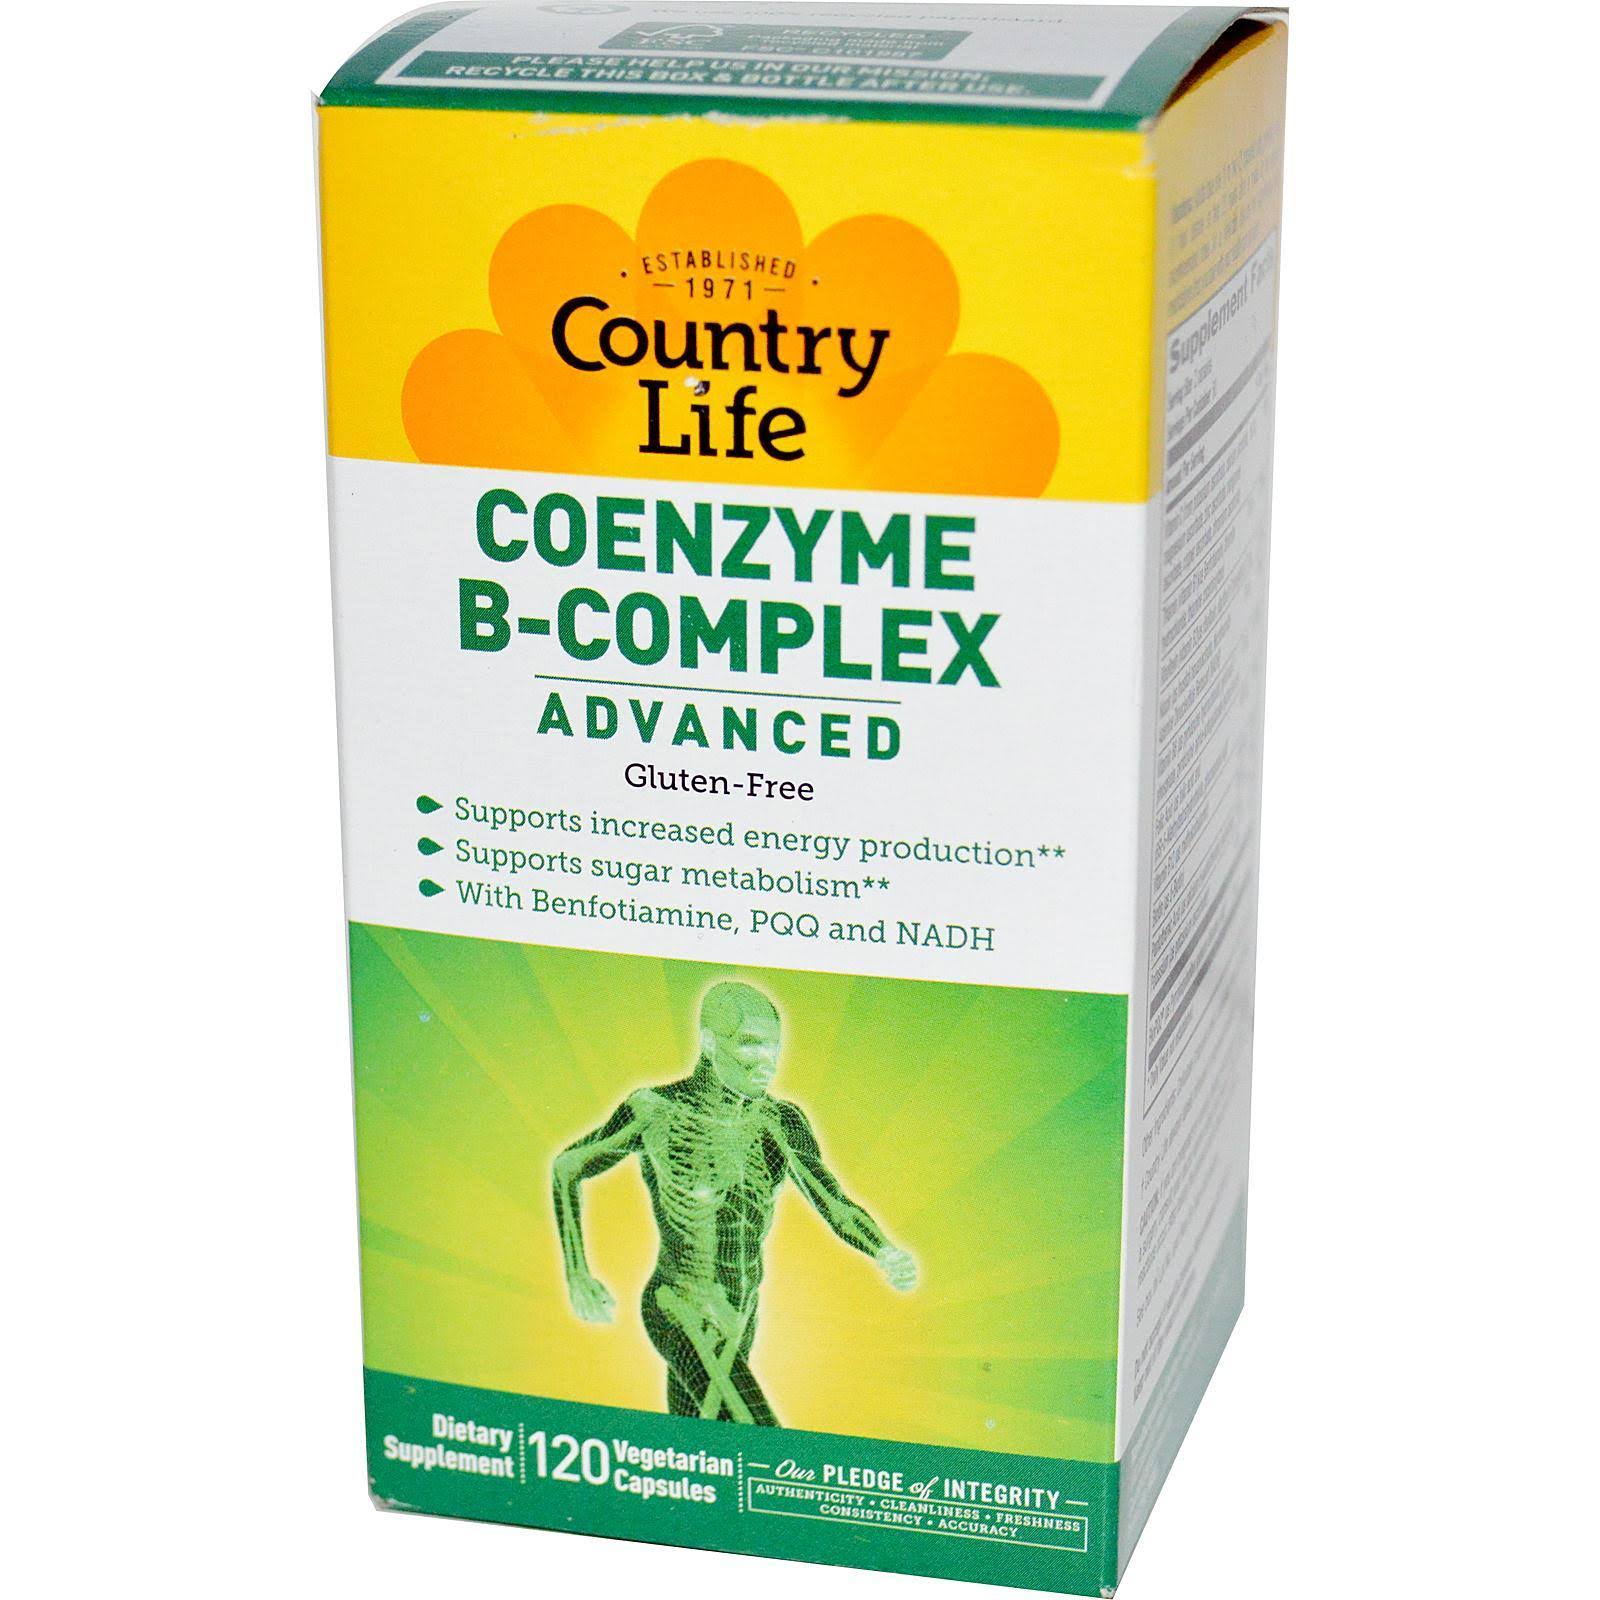 Country Life Coenzyme B Complex Advanced Supplement - 12 Vegetarian Capsules